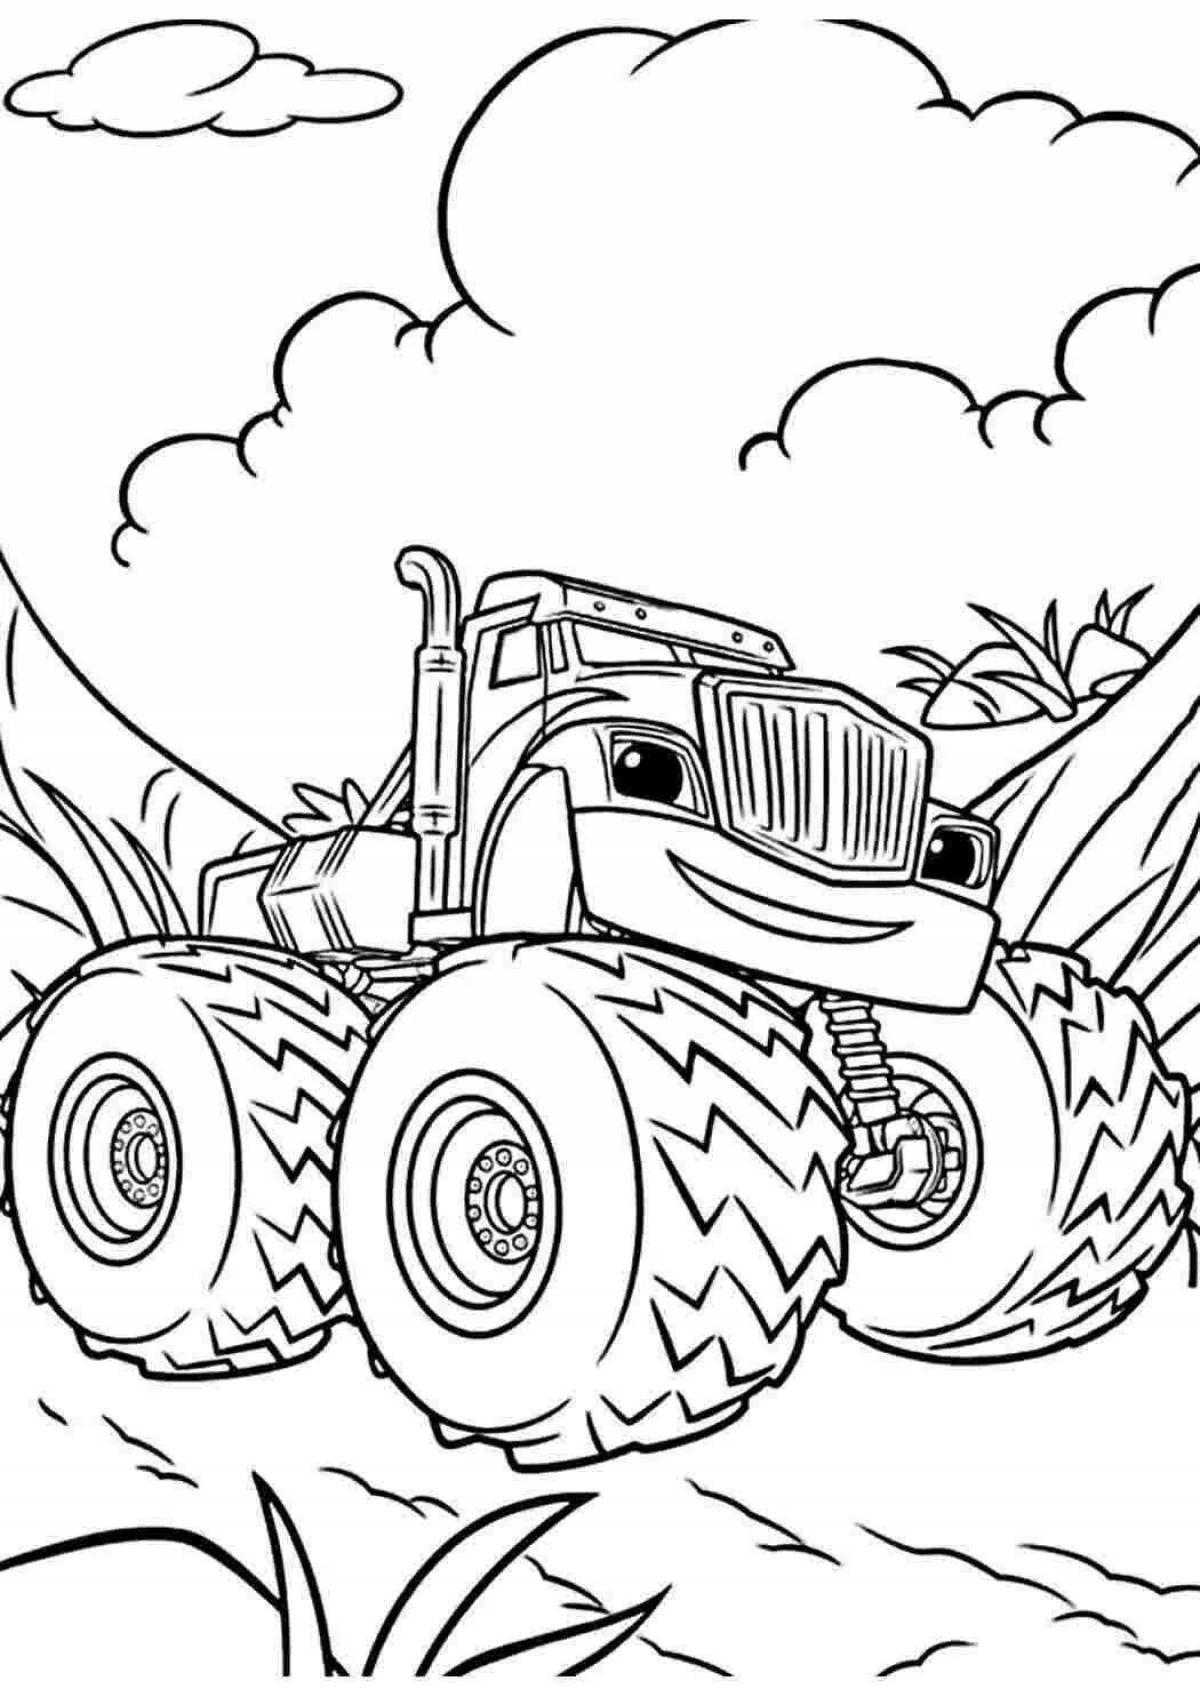 Color-frenzy coloring page drive